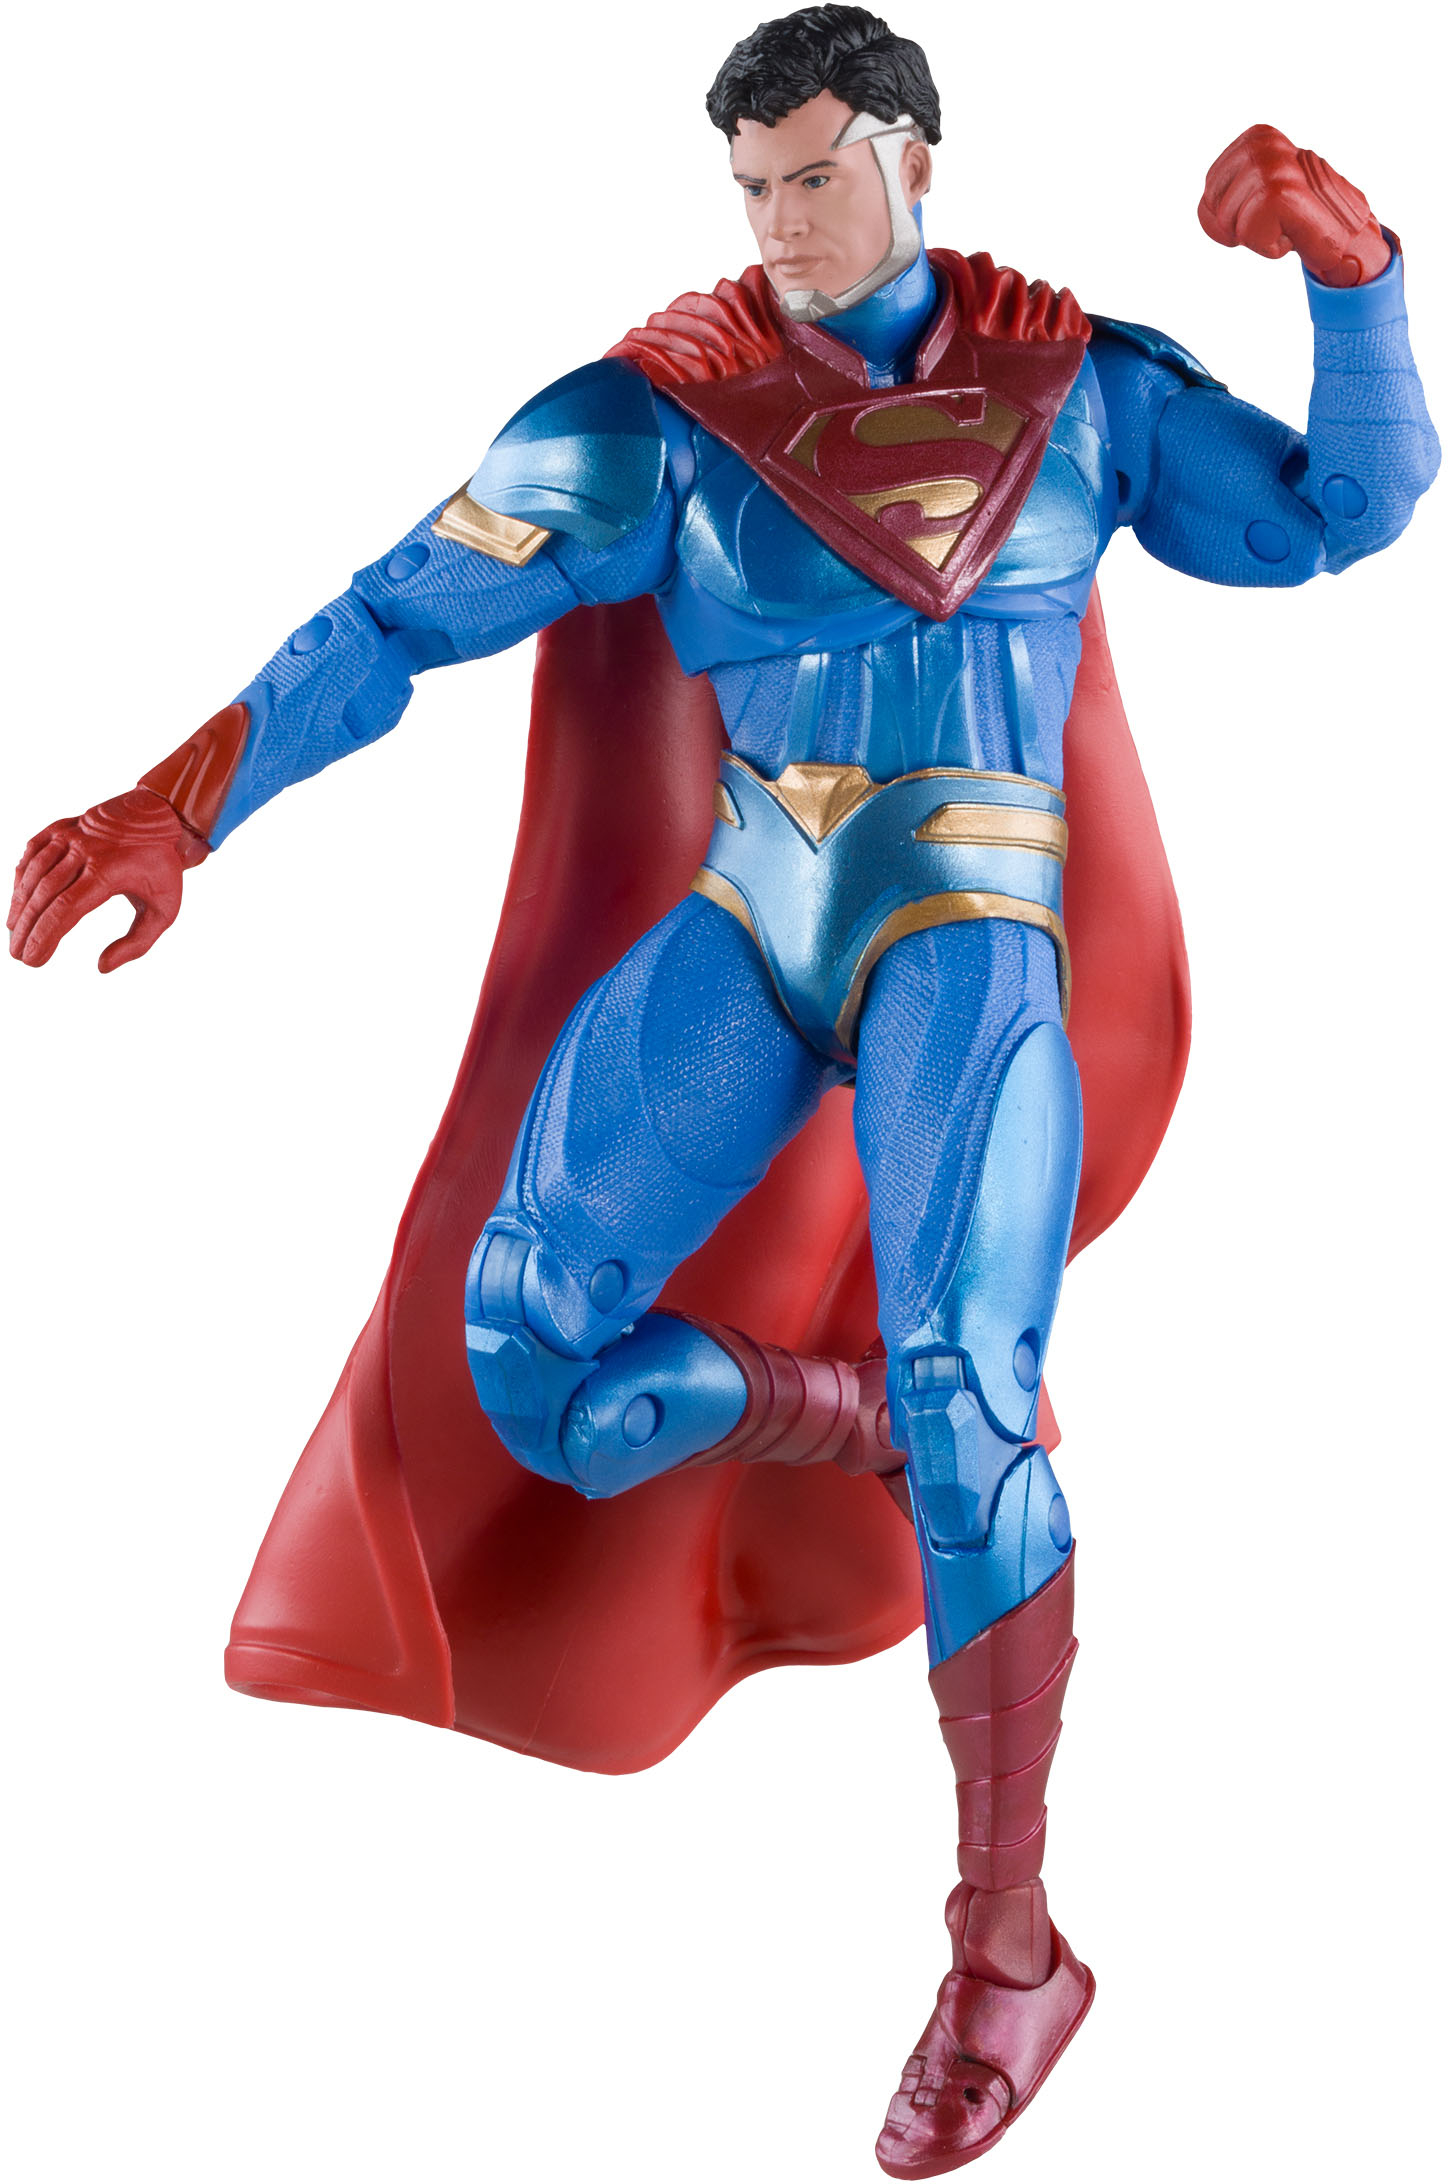 Angle View: McFarlane Toys - DC Gaming 7” Figure – Superman (Injustice 2)